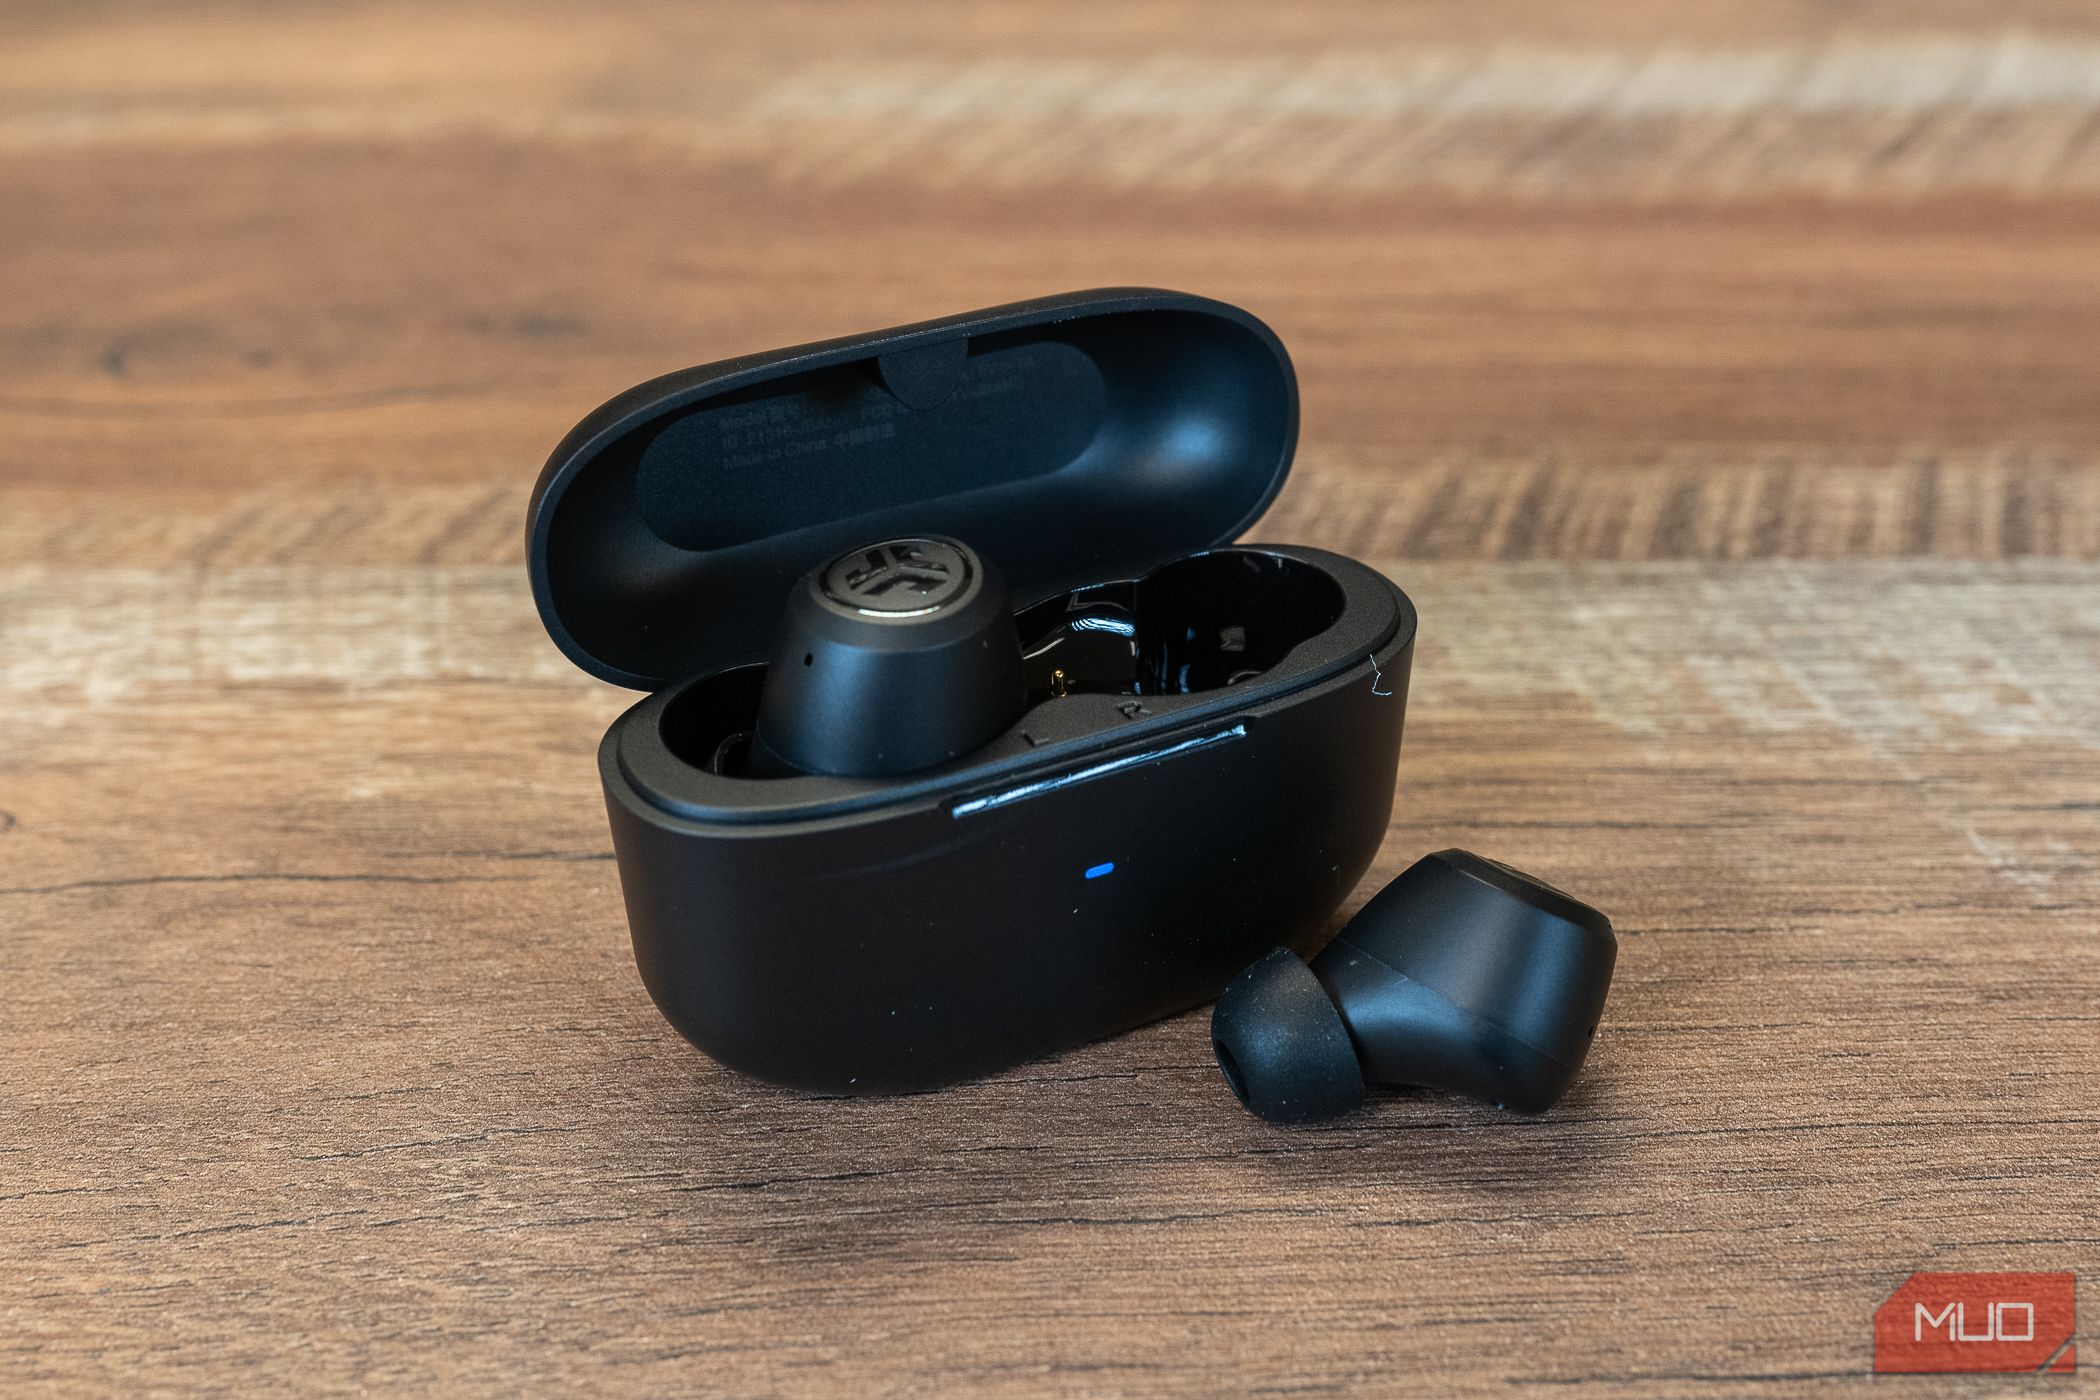 JLab JBuds ANC 3 Review: Enjoyable Budget Earbuds With a Few Issues